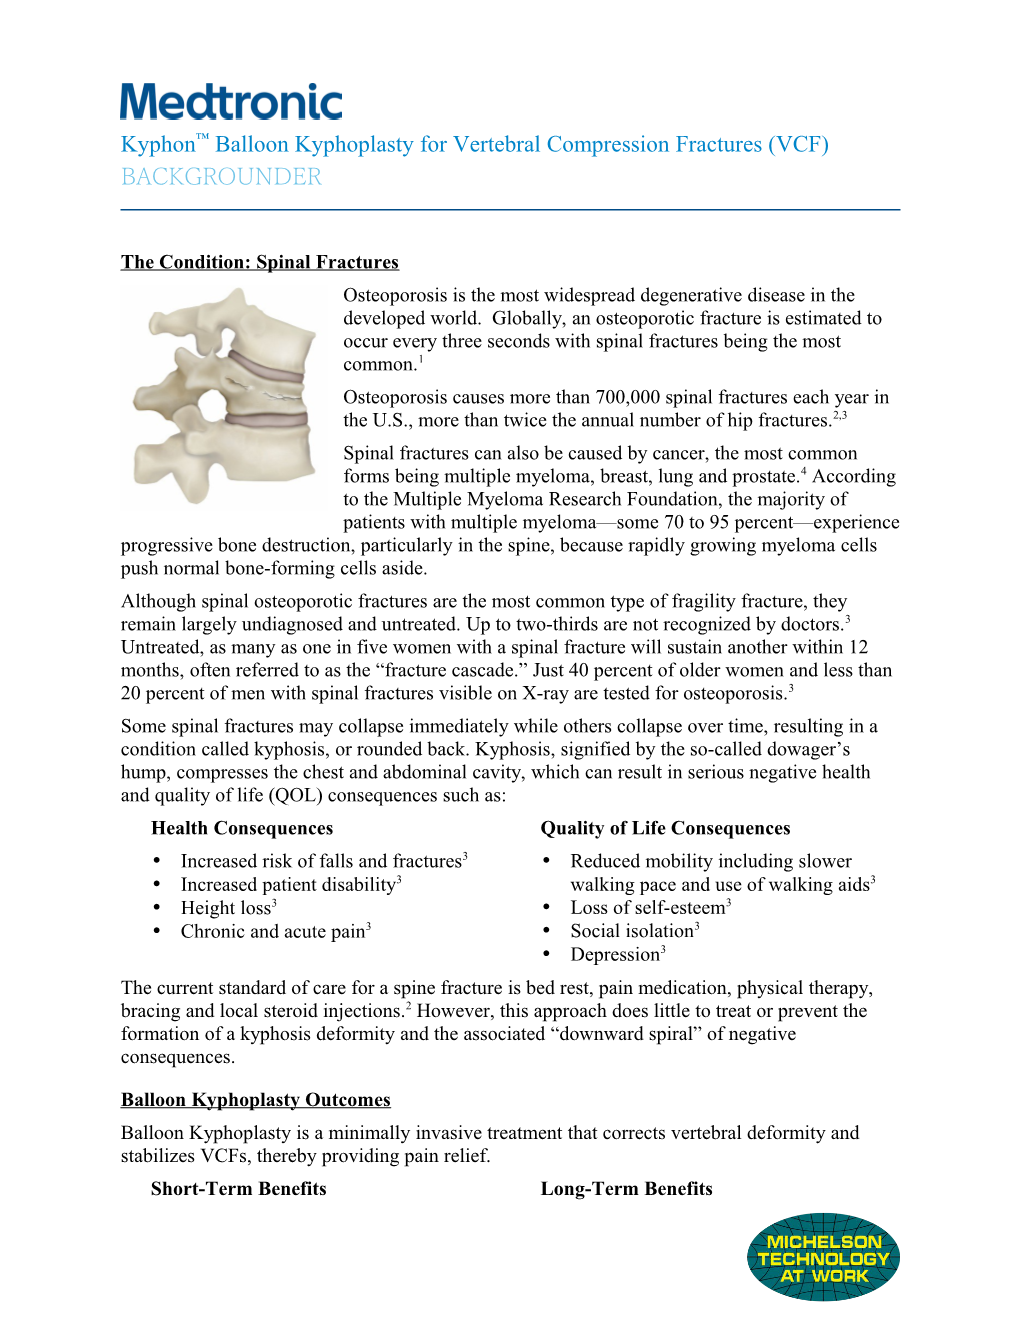 The Condition: Spinal Fractures